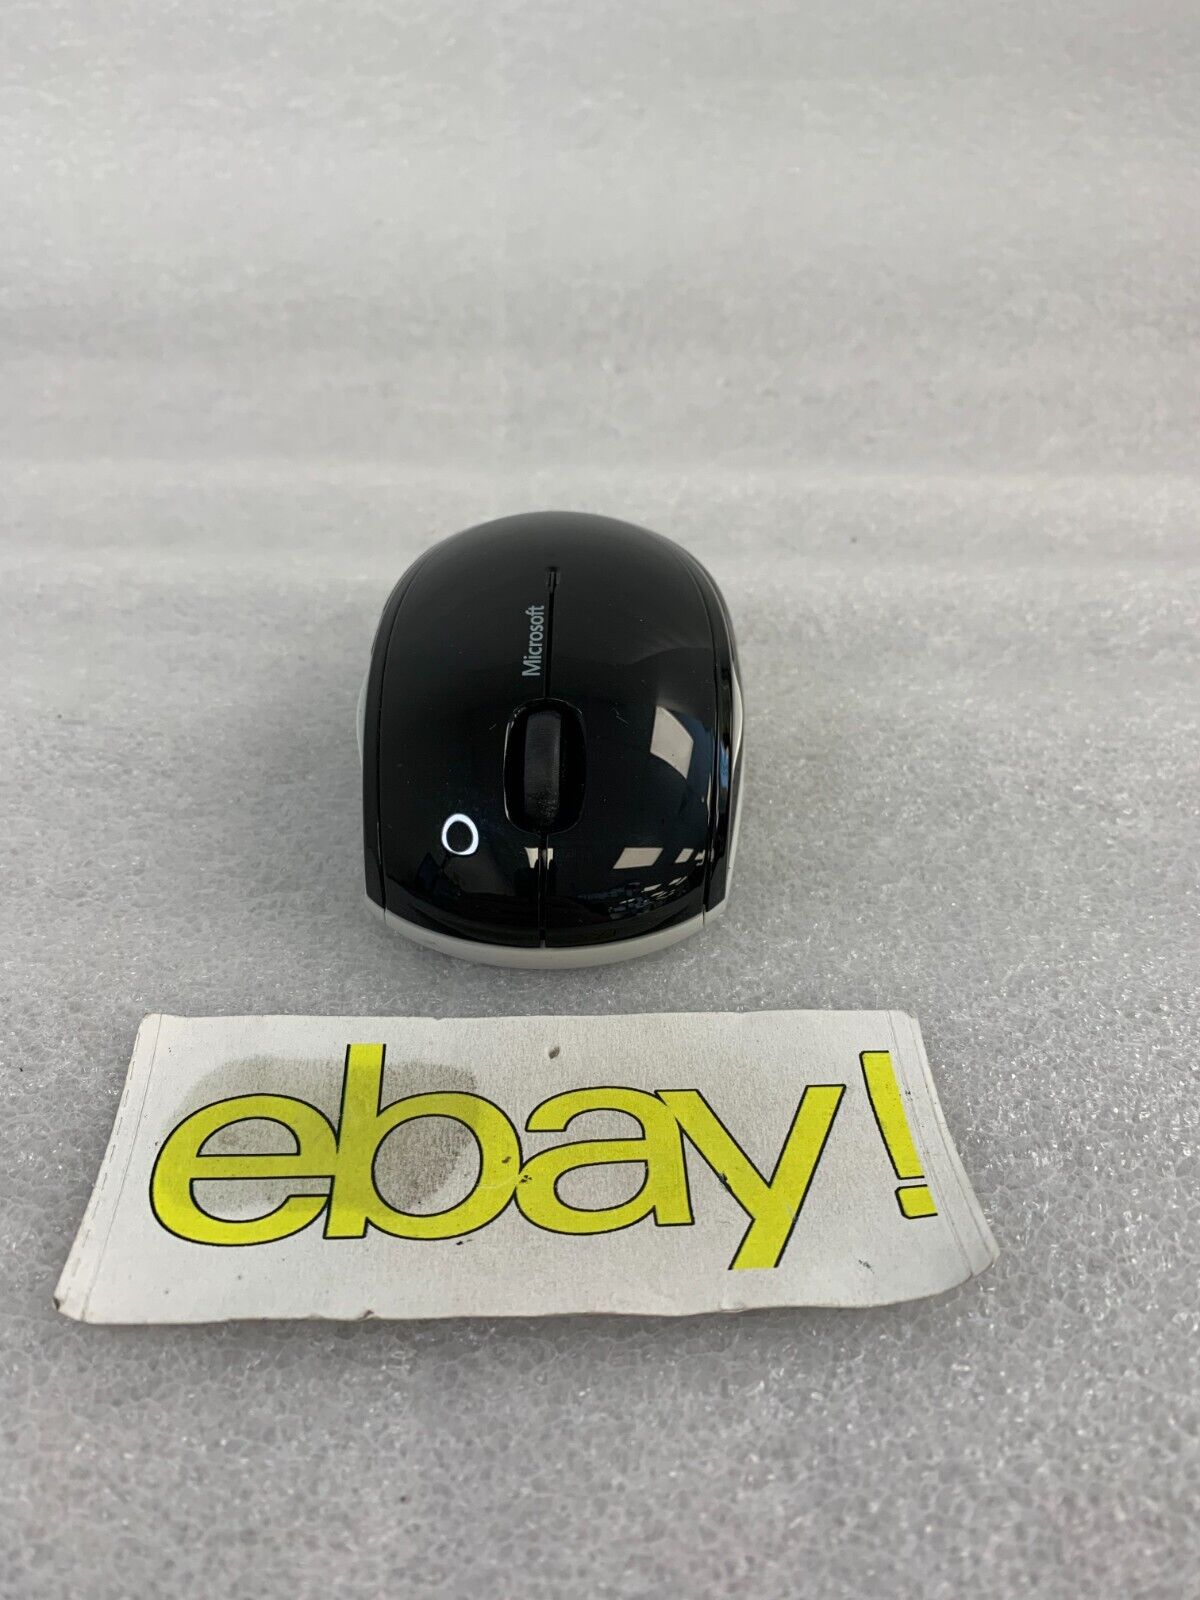 Microsoft Wireless Mouse 5000 MDL 1387 Laser 5-Button NO USB Dongle 